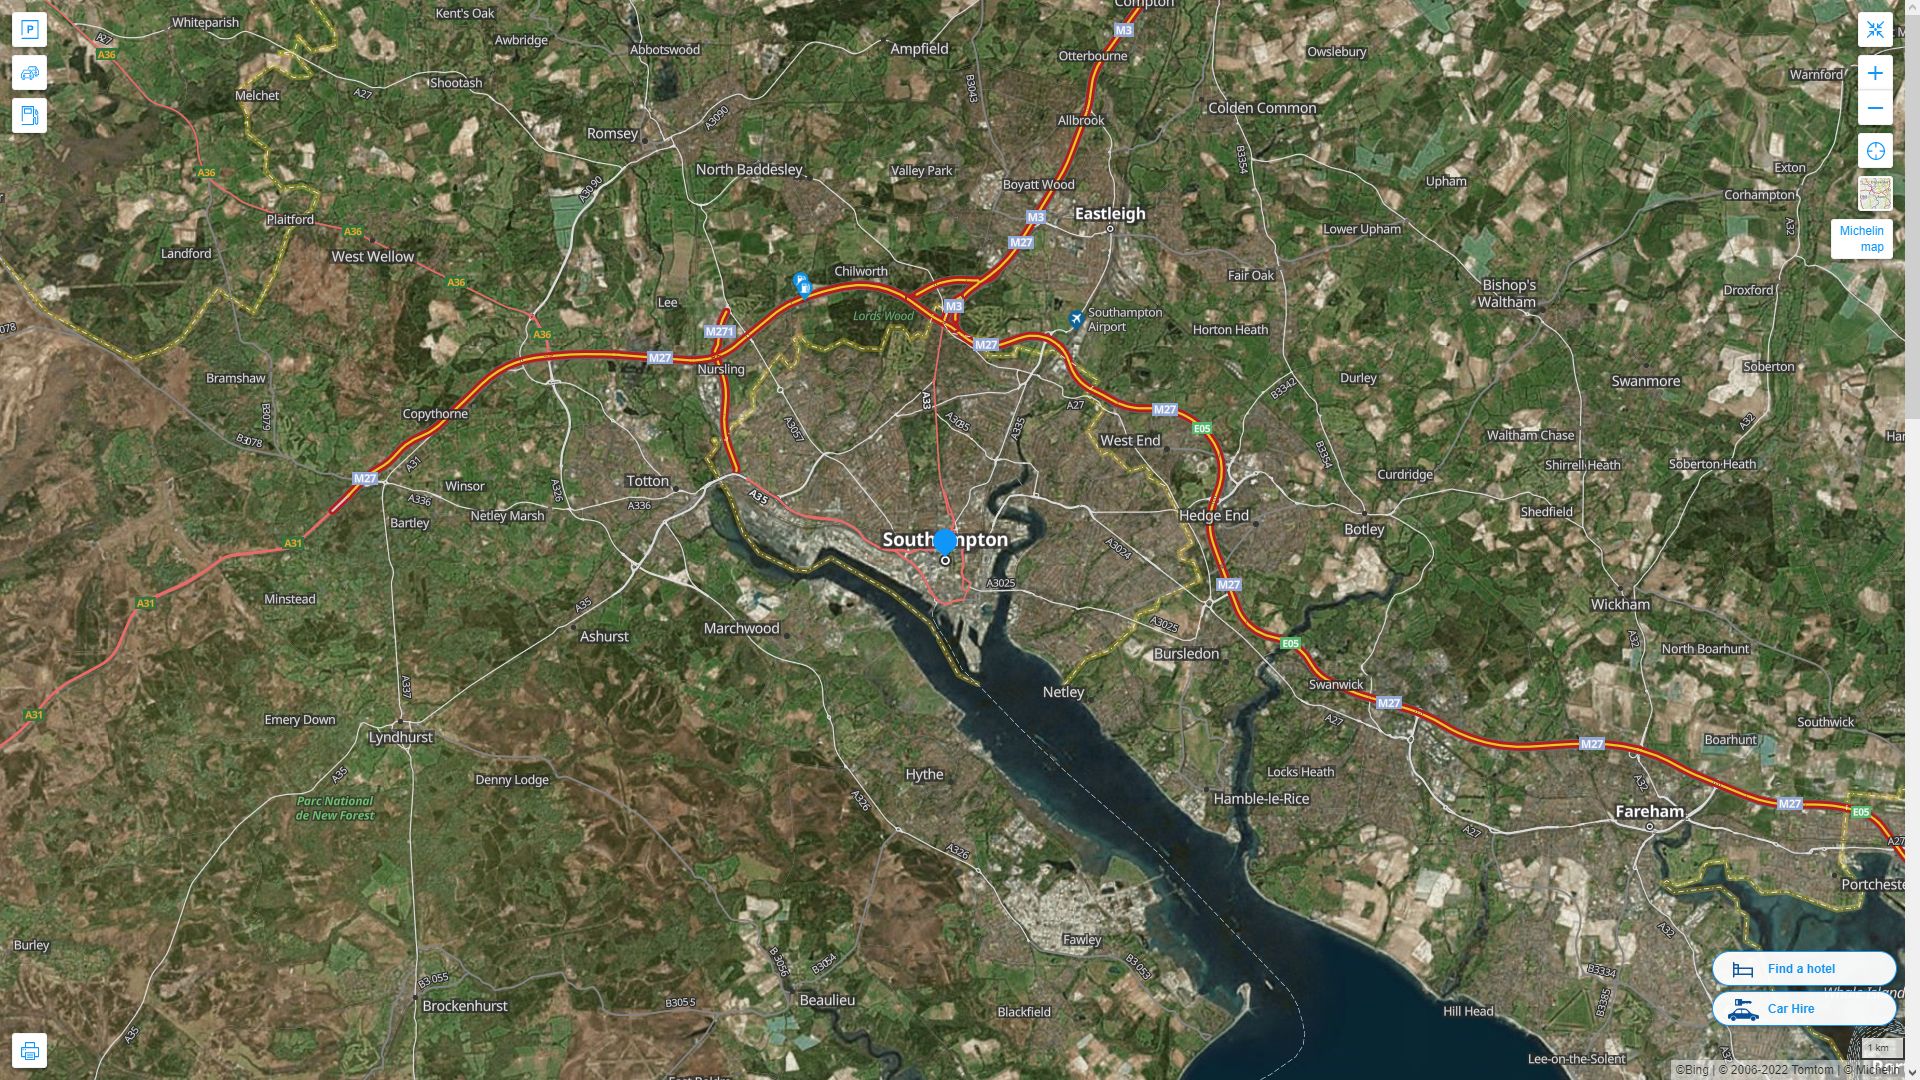 Southampton Highway and Road Map with Satellite View